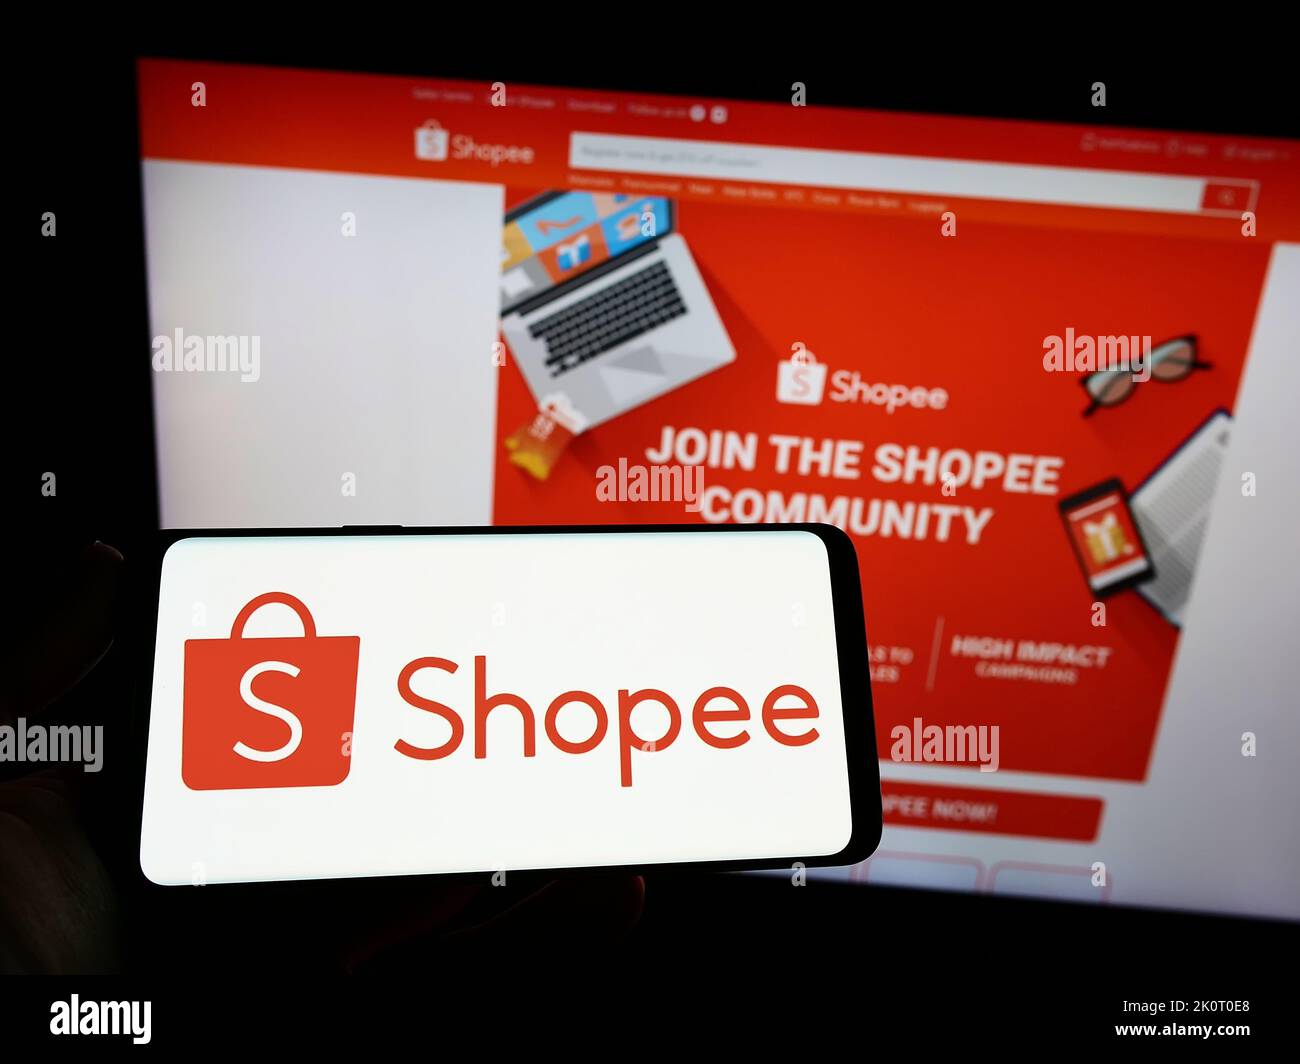 Shopee is e-commerce technology company. Smartphone with Shopee logo on the  screen, shopping cart and parcels Stock Photo - Alamy